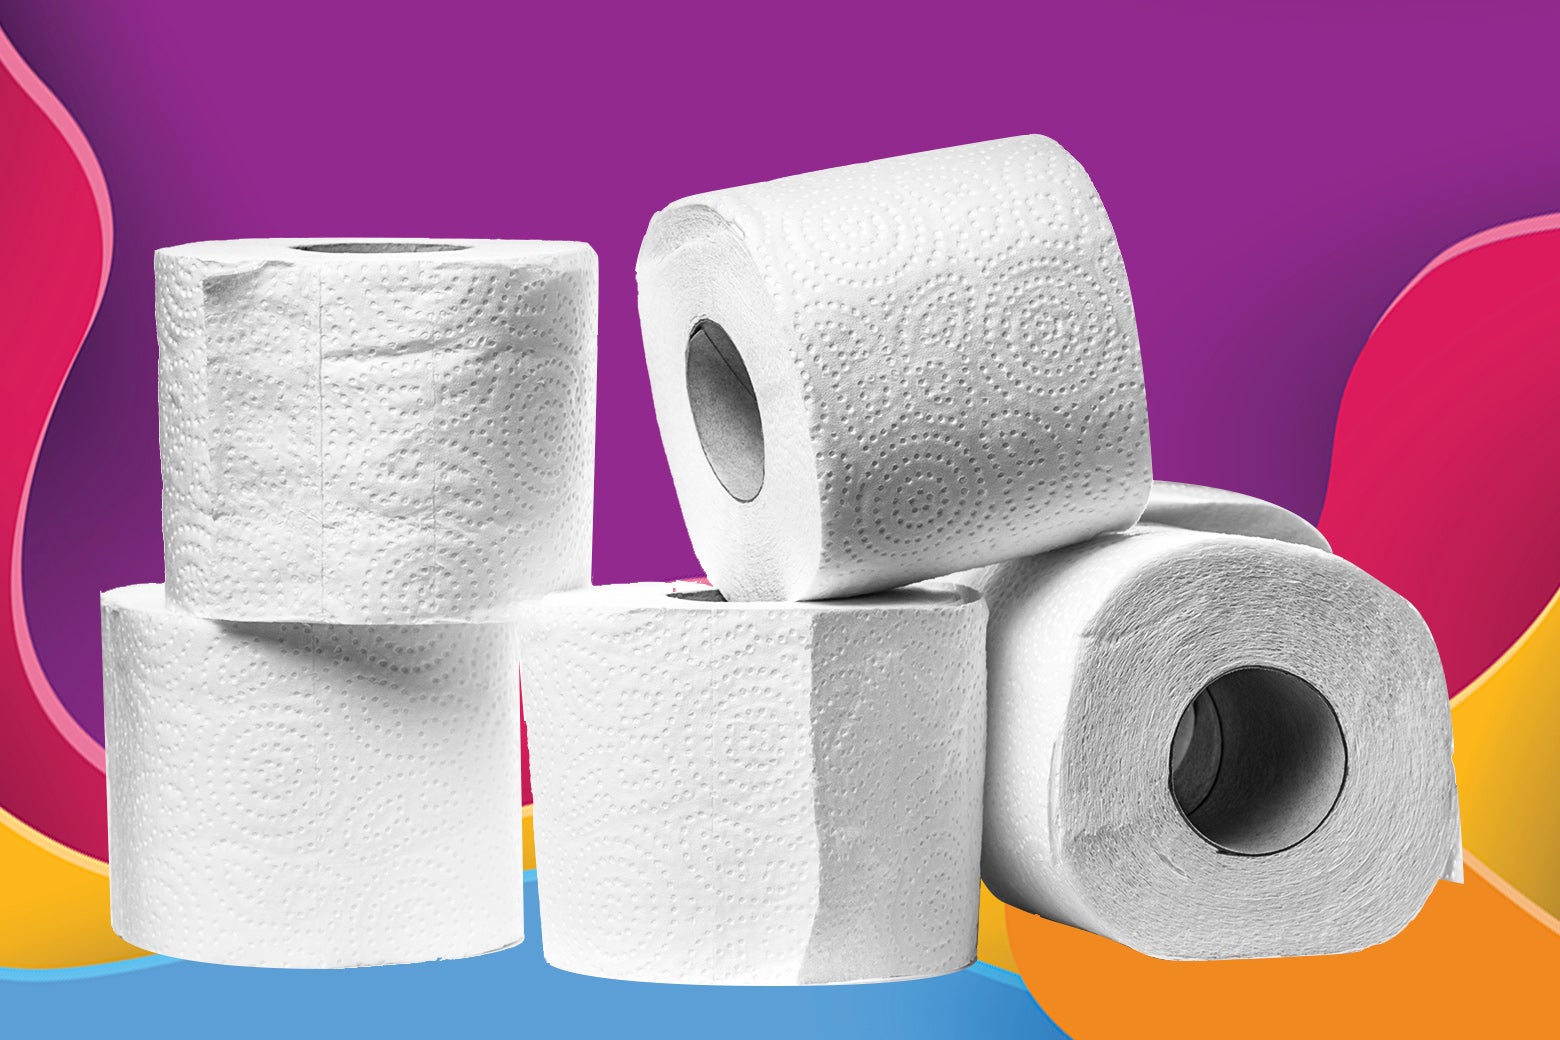 A bunch of rolls of toilet paper against a colorful background.